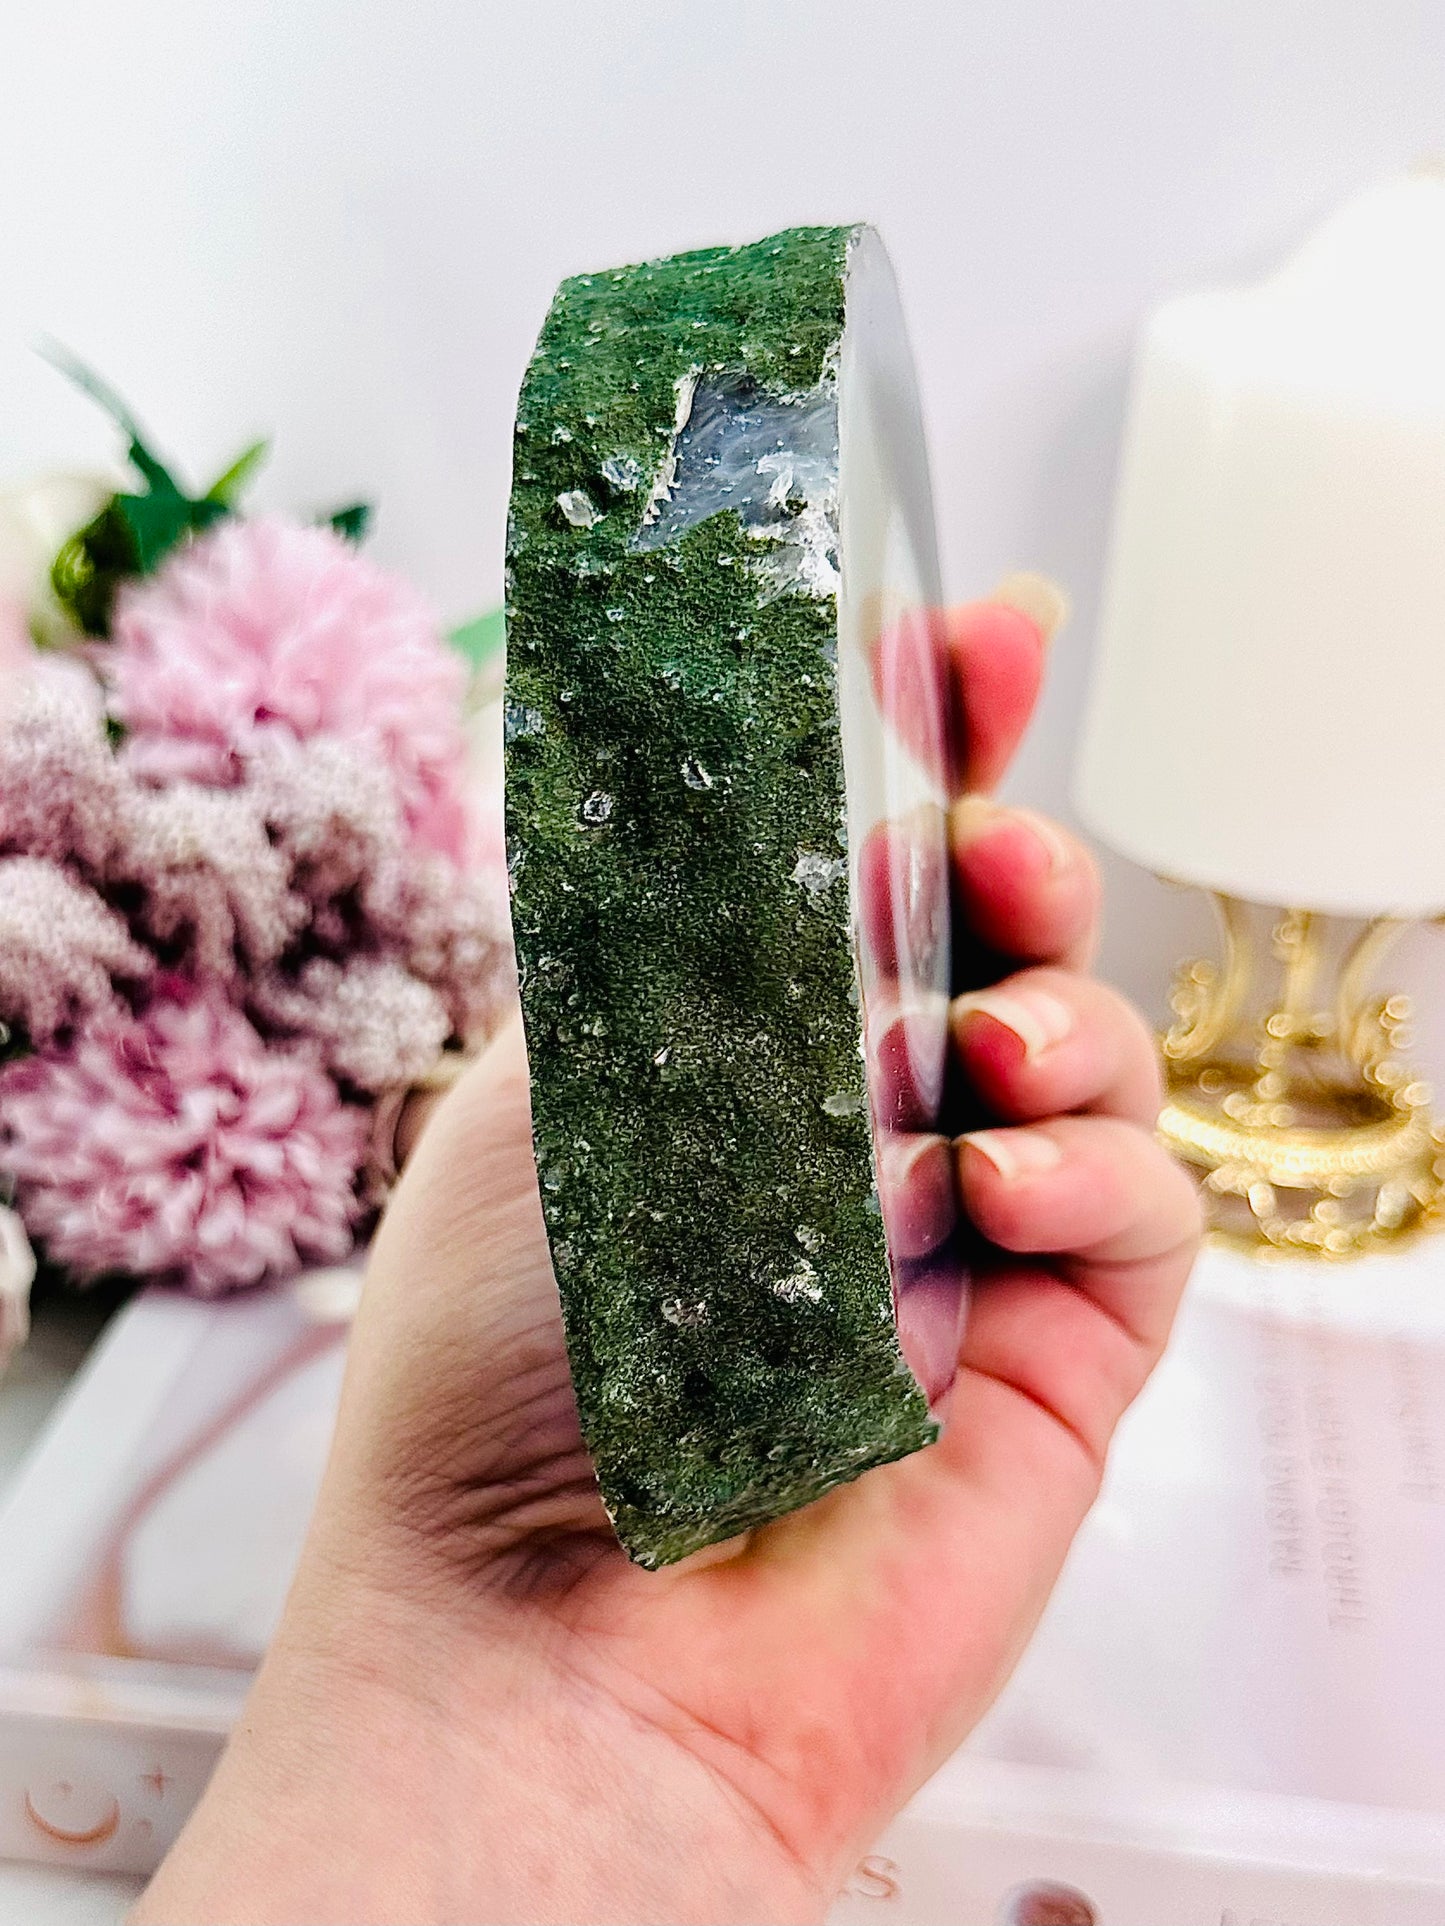 Stunning Large Chunky 707gram Agate Slab On Stand From Brazil